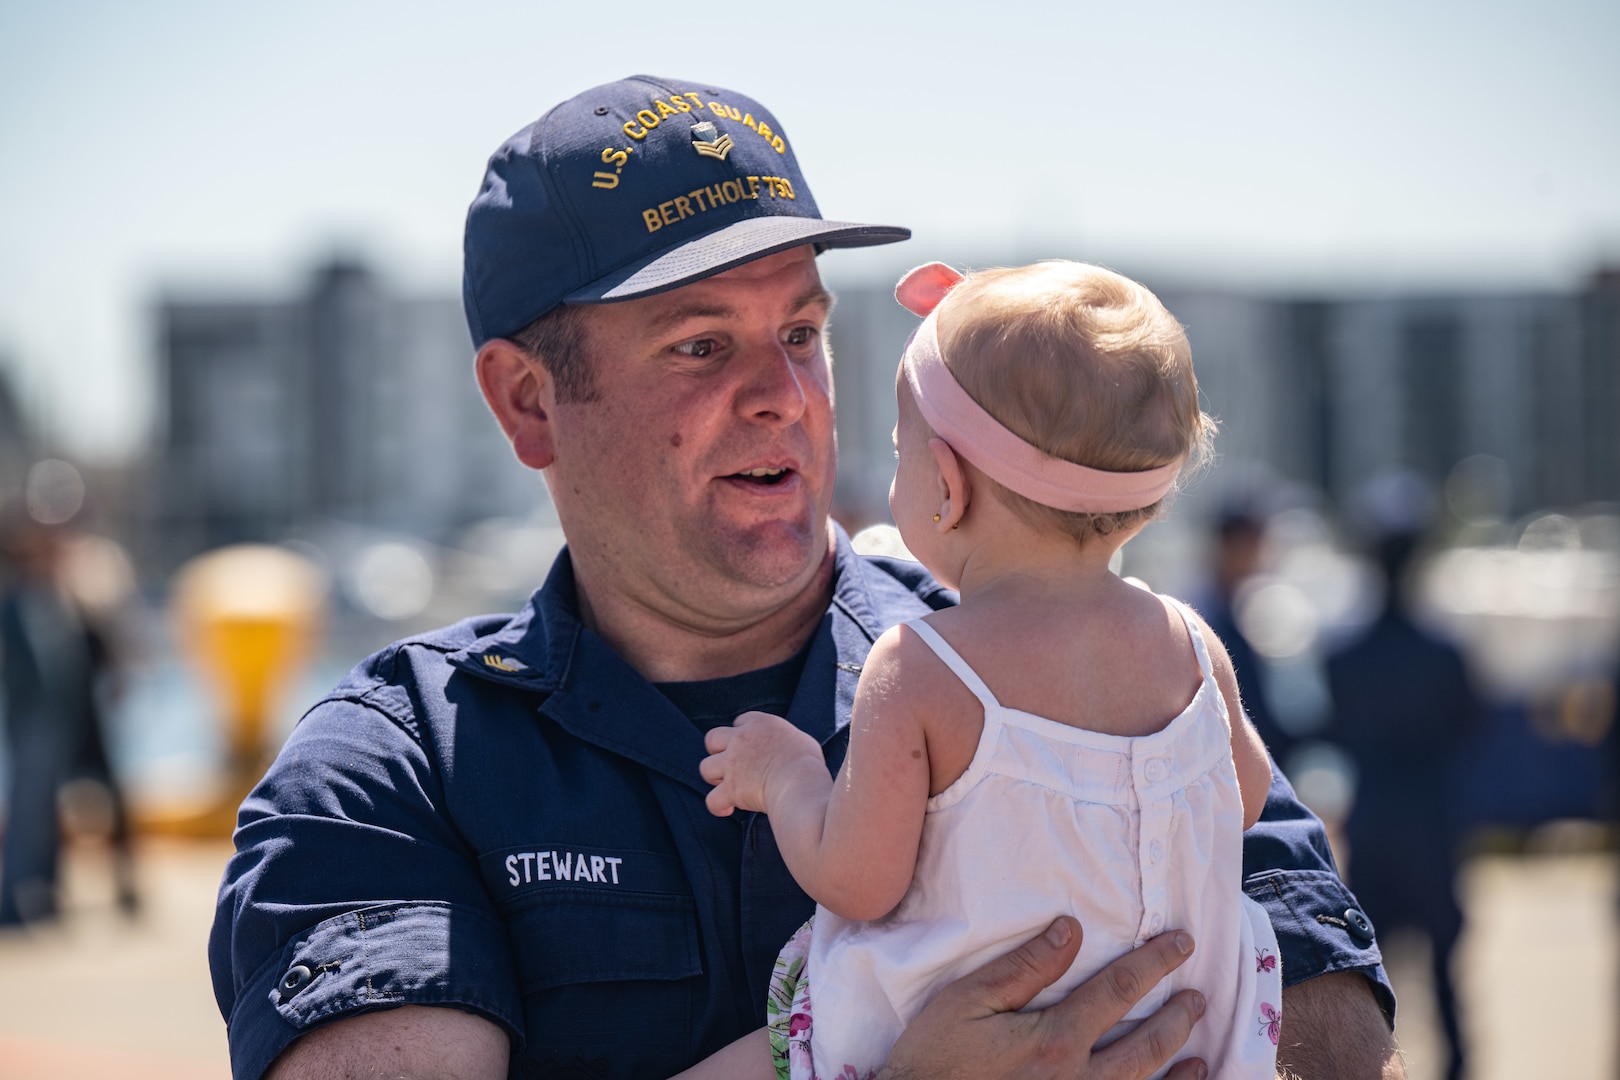 U.S. Coast Guard Petty Officer 1st Class Chase Stewart, an Electrician’s Mate assigned to the Coast Guard Cutter Bertholf (WMSL 750) greets his family at the cutter's return to home port on Coast Guard Base Alameda, Calif., following a 98-day patrol in the Indo-Pacific region, April 8, 2024. The Cutter Bertholf deployed to the Indo-Pacific to advance relationships with ally and partner nations to build a more stable, free, open and resilient region with unrestricted, lawful access to the maritime commons.​ (U.S. Coast Guard Photo by Petty Officer 3rd Class Hunter Schnabel)